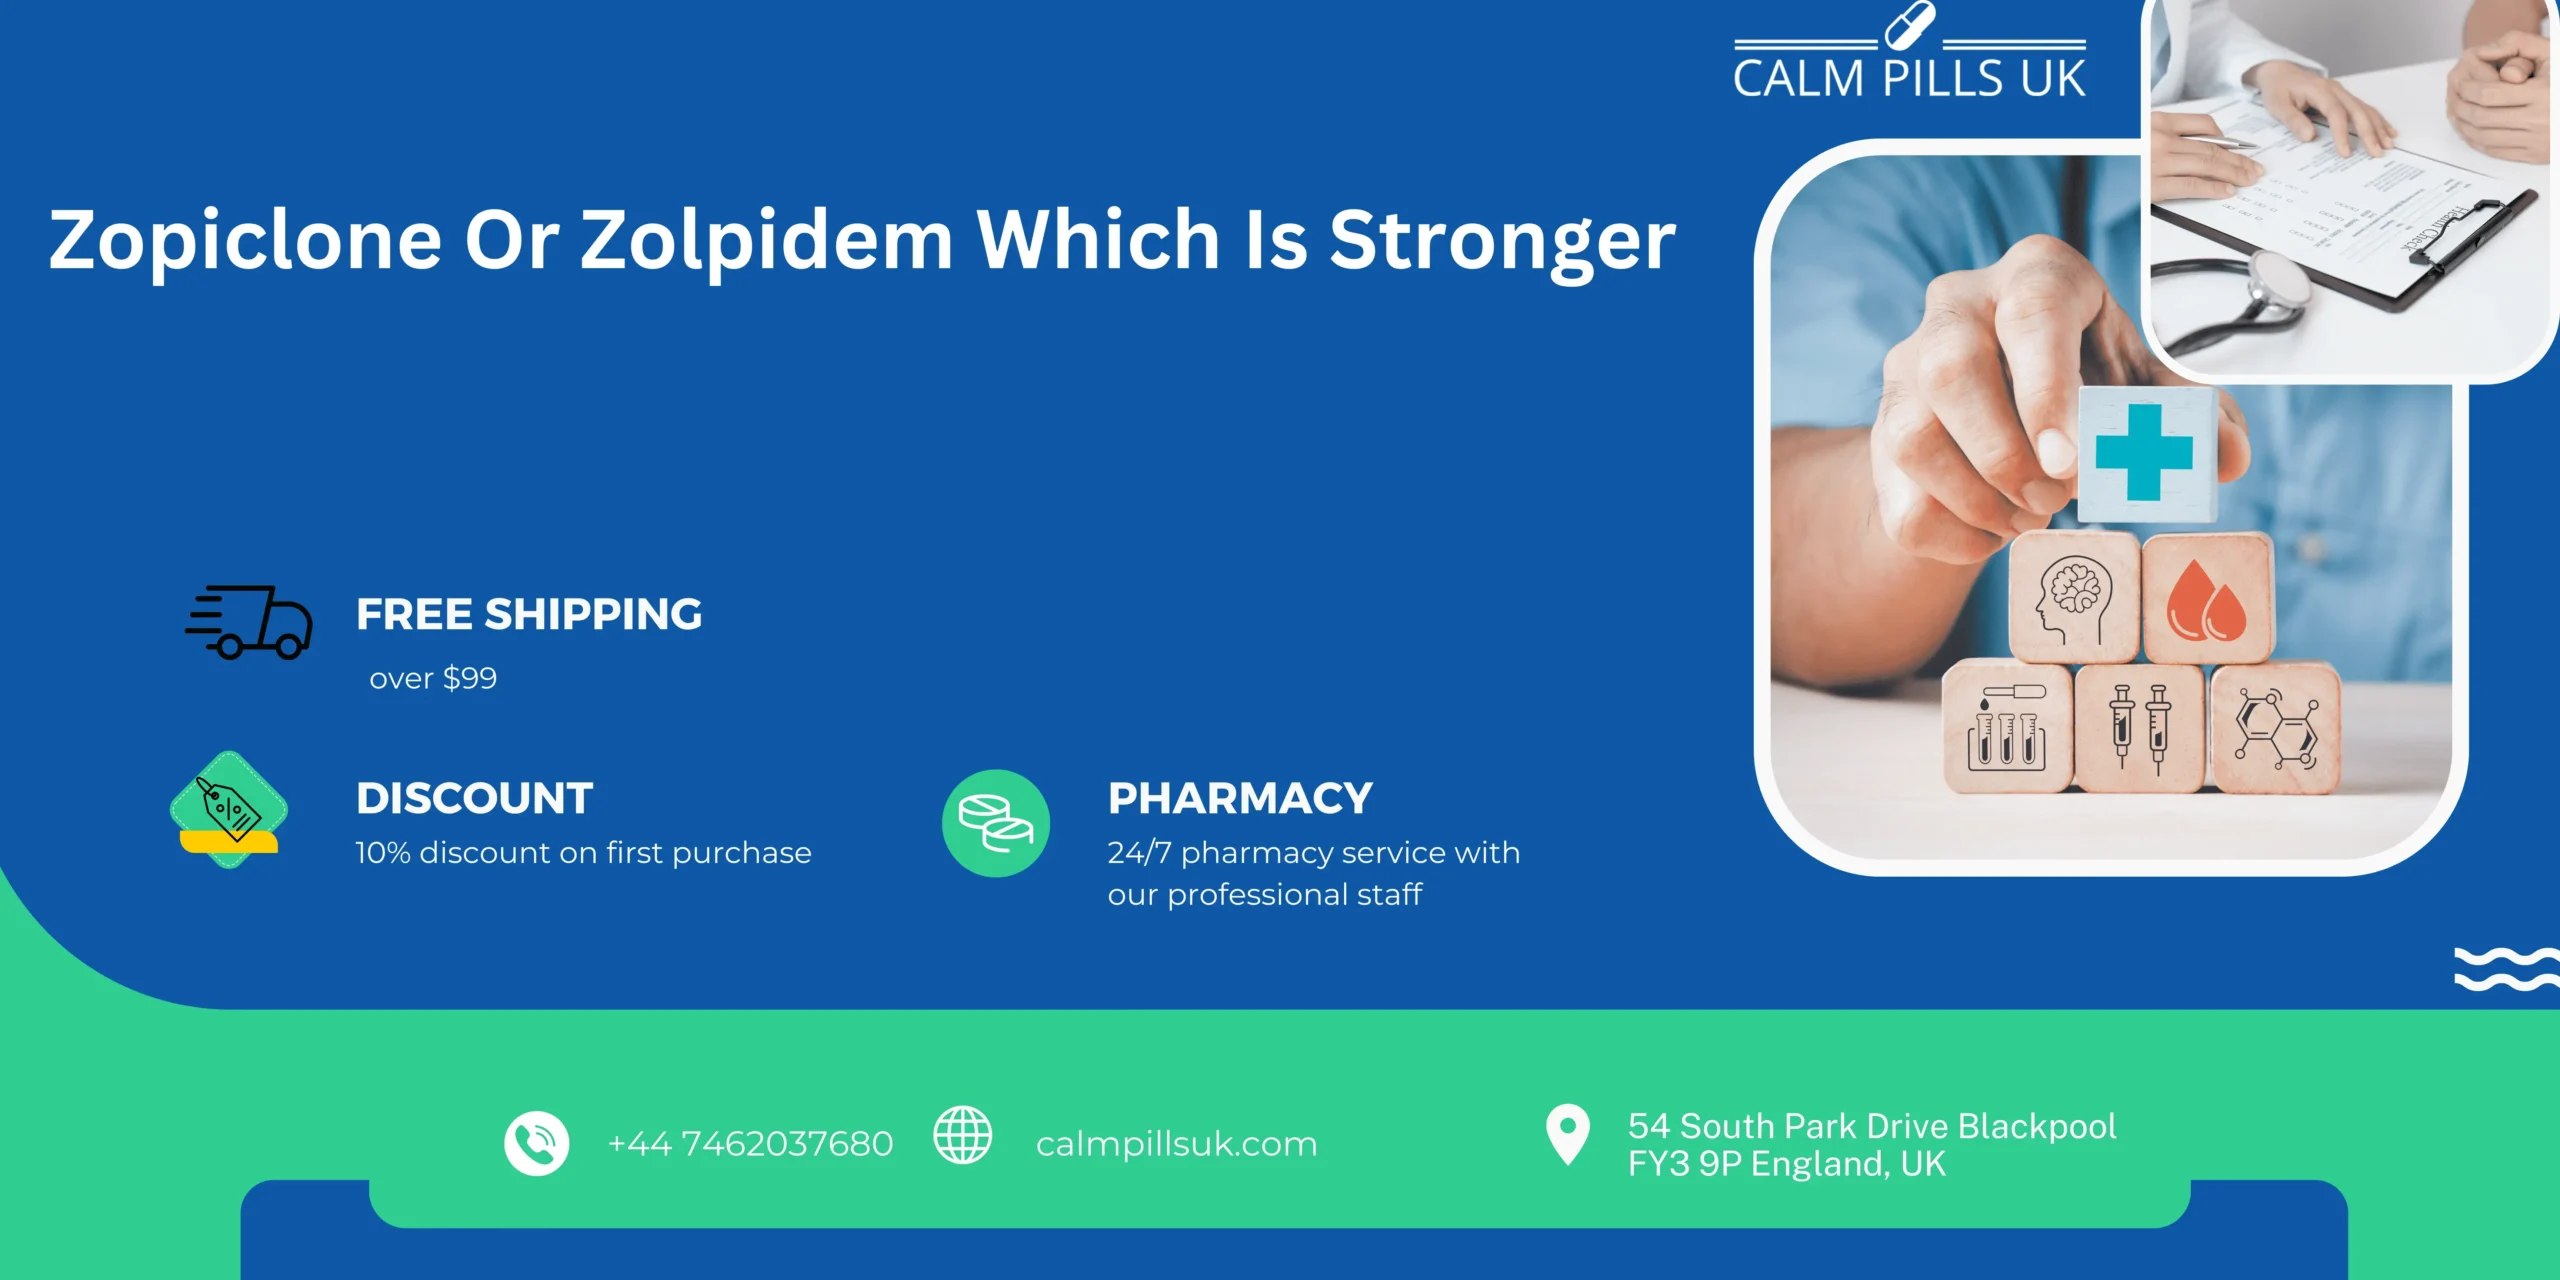 Zopiclone Or Zolpidem Which Is Stronger